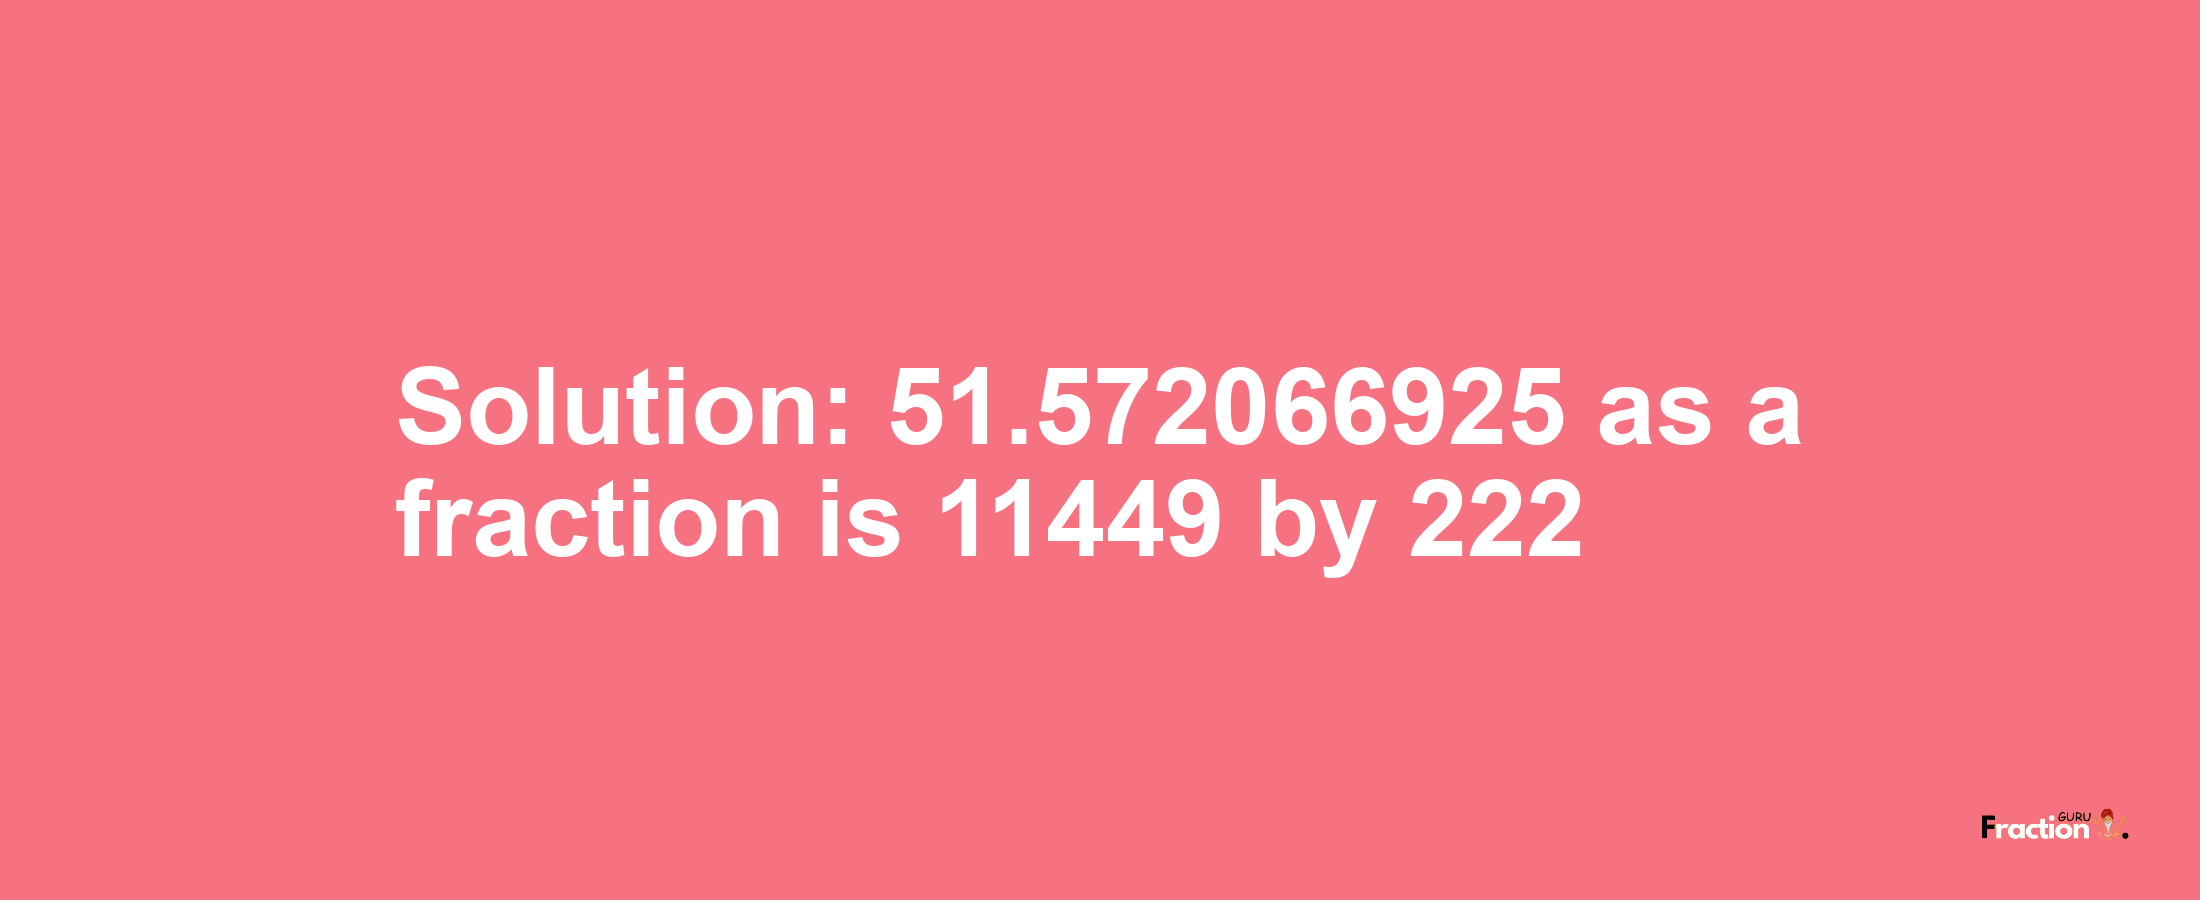 Solution:51.572066925 as a fraction is 11449/222